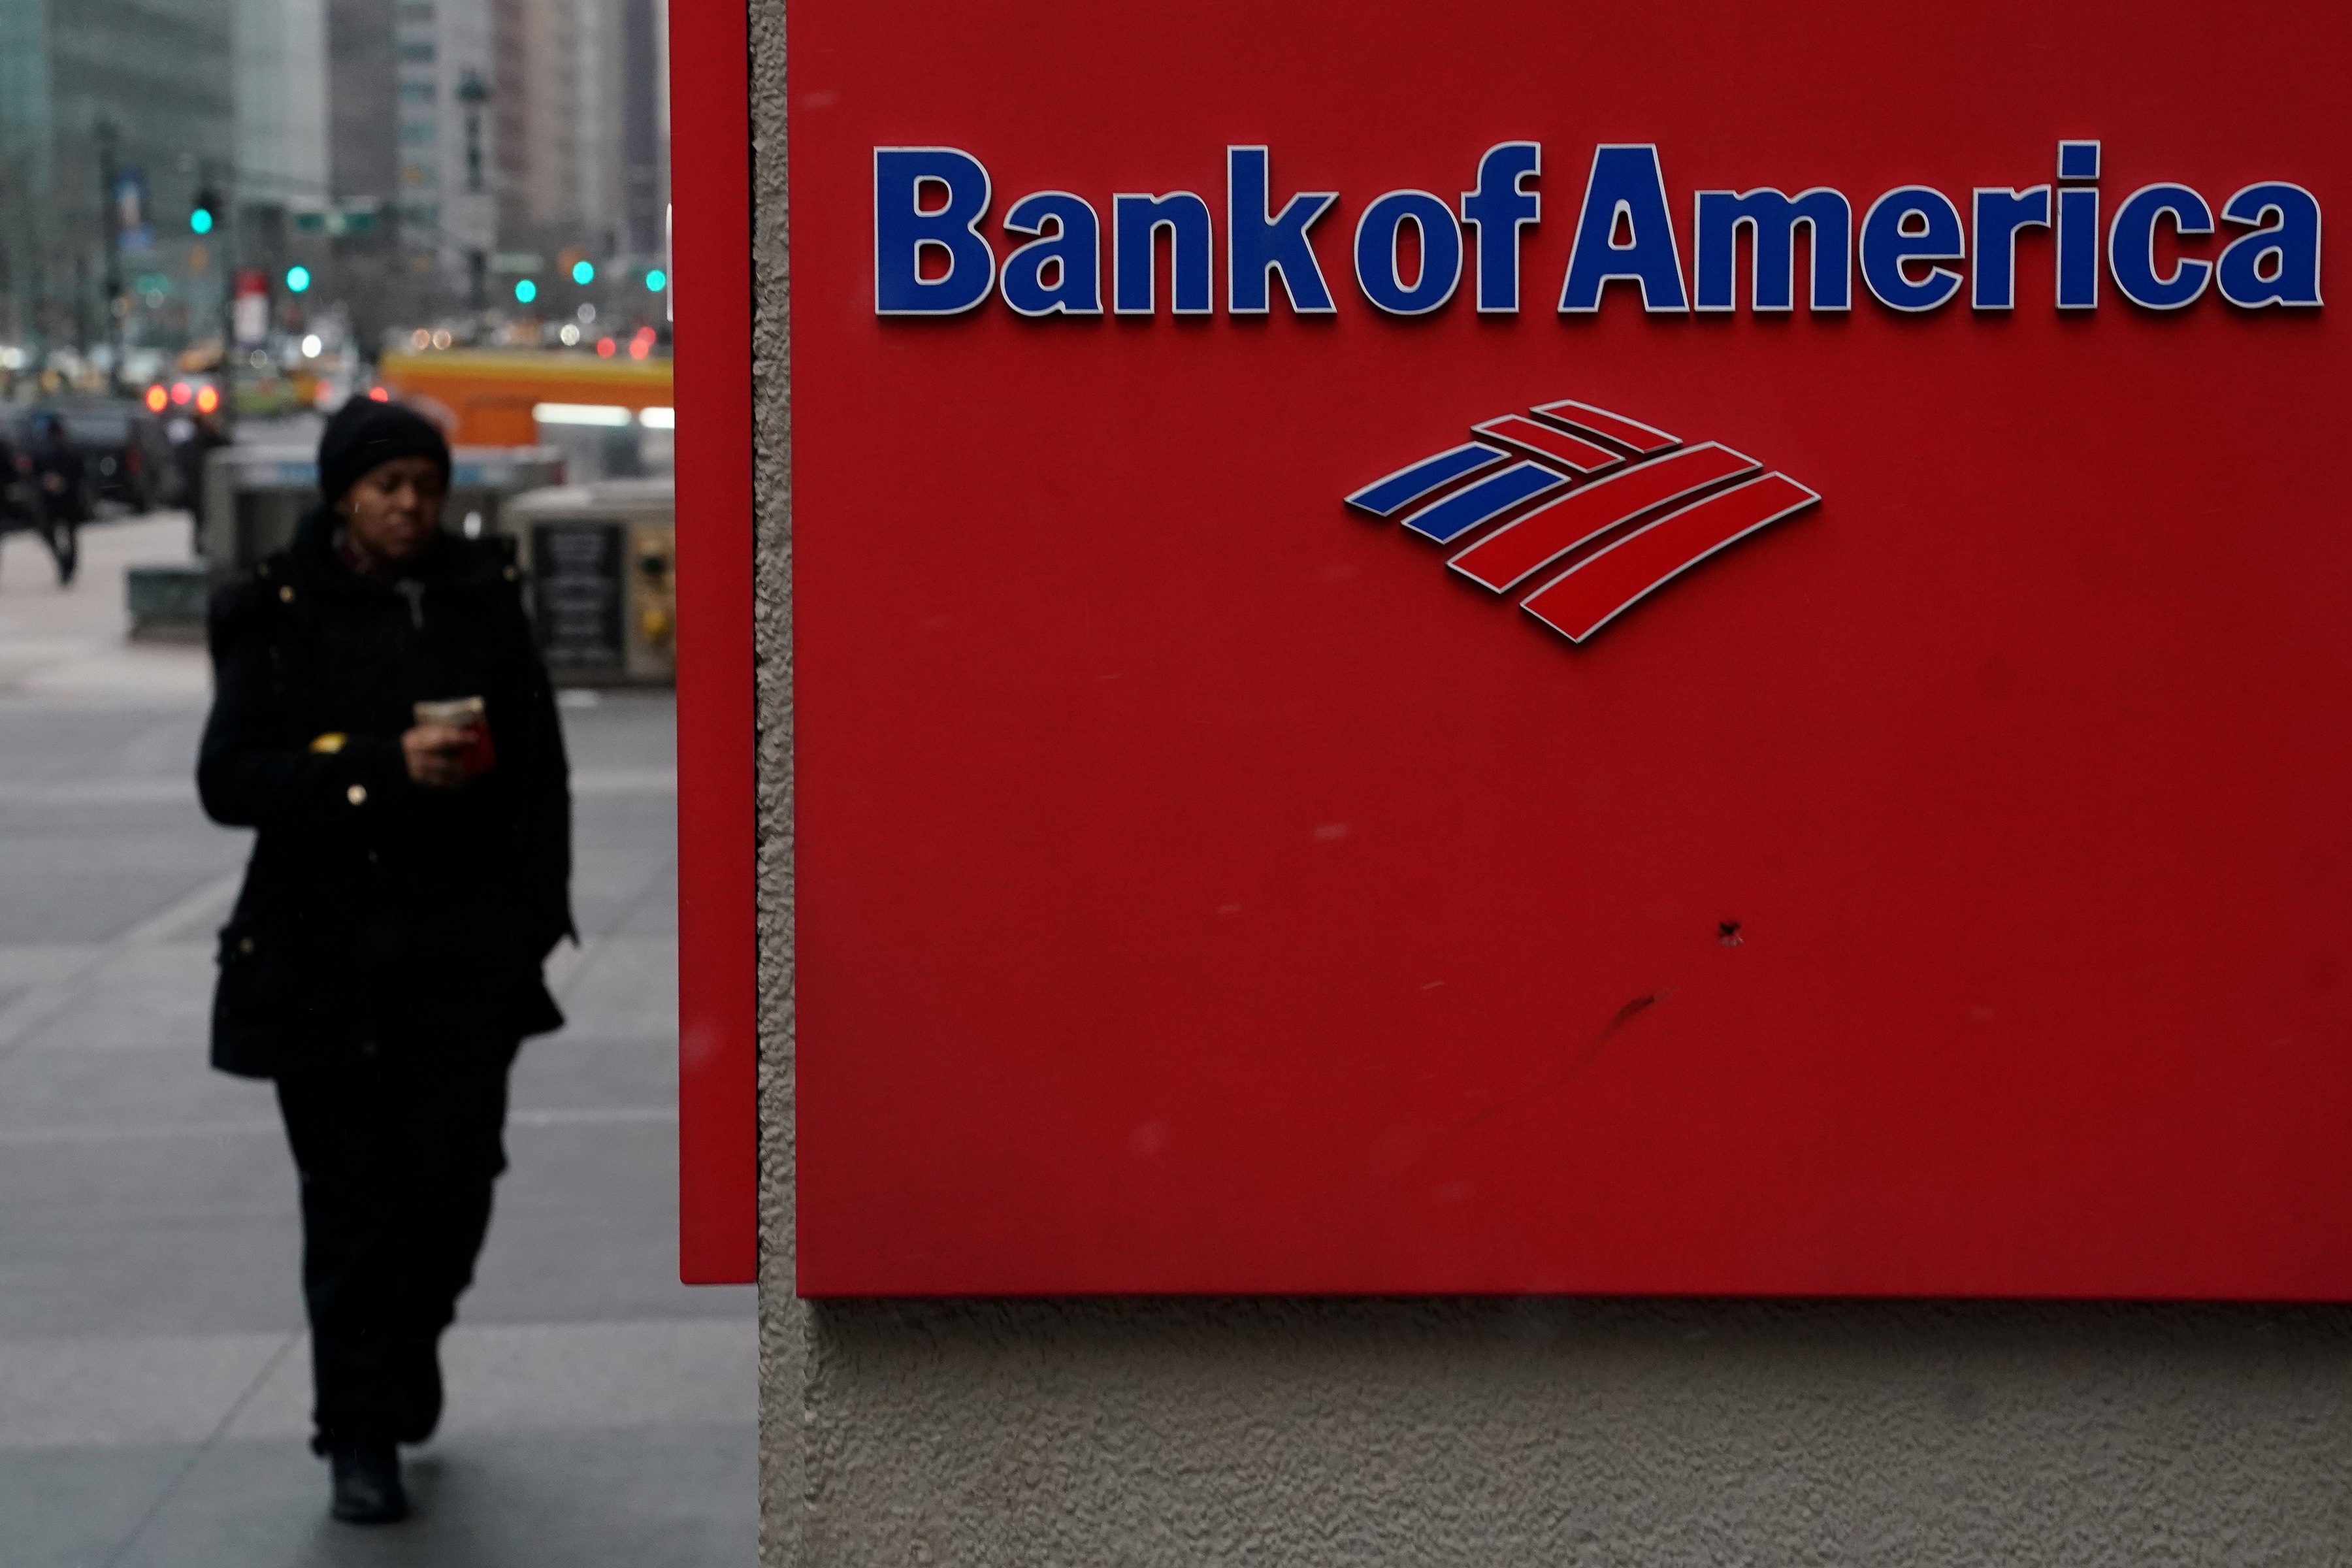 Bank of America eyes loan growth after first decline in 6 years